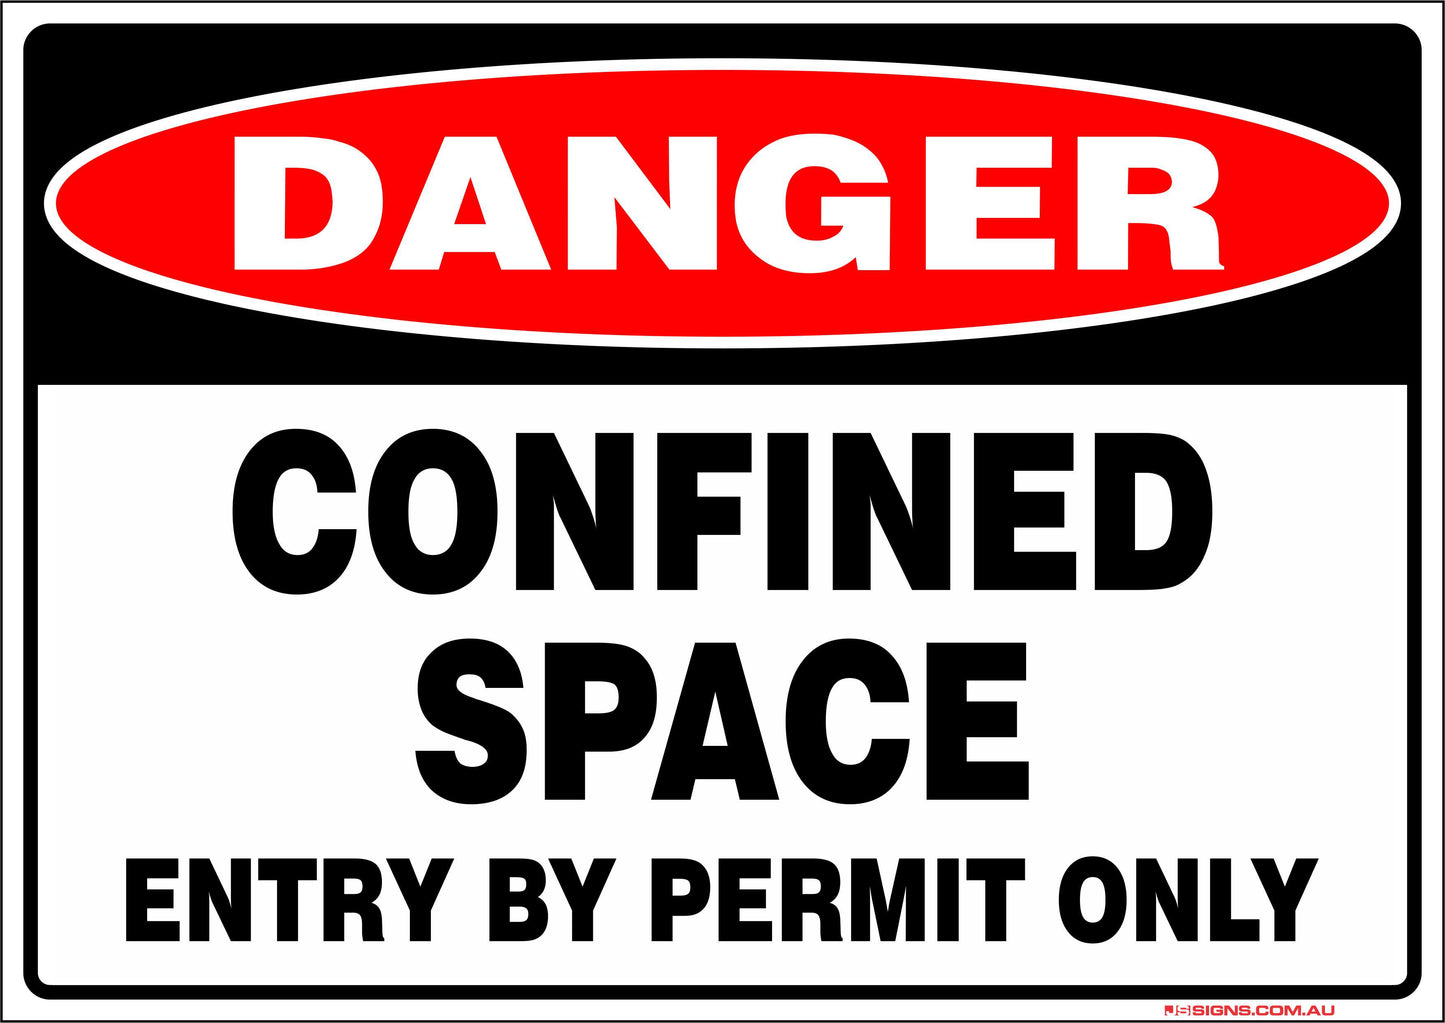 Danger Confined Space Entry By Permit Only